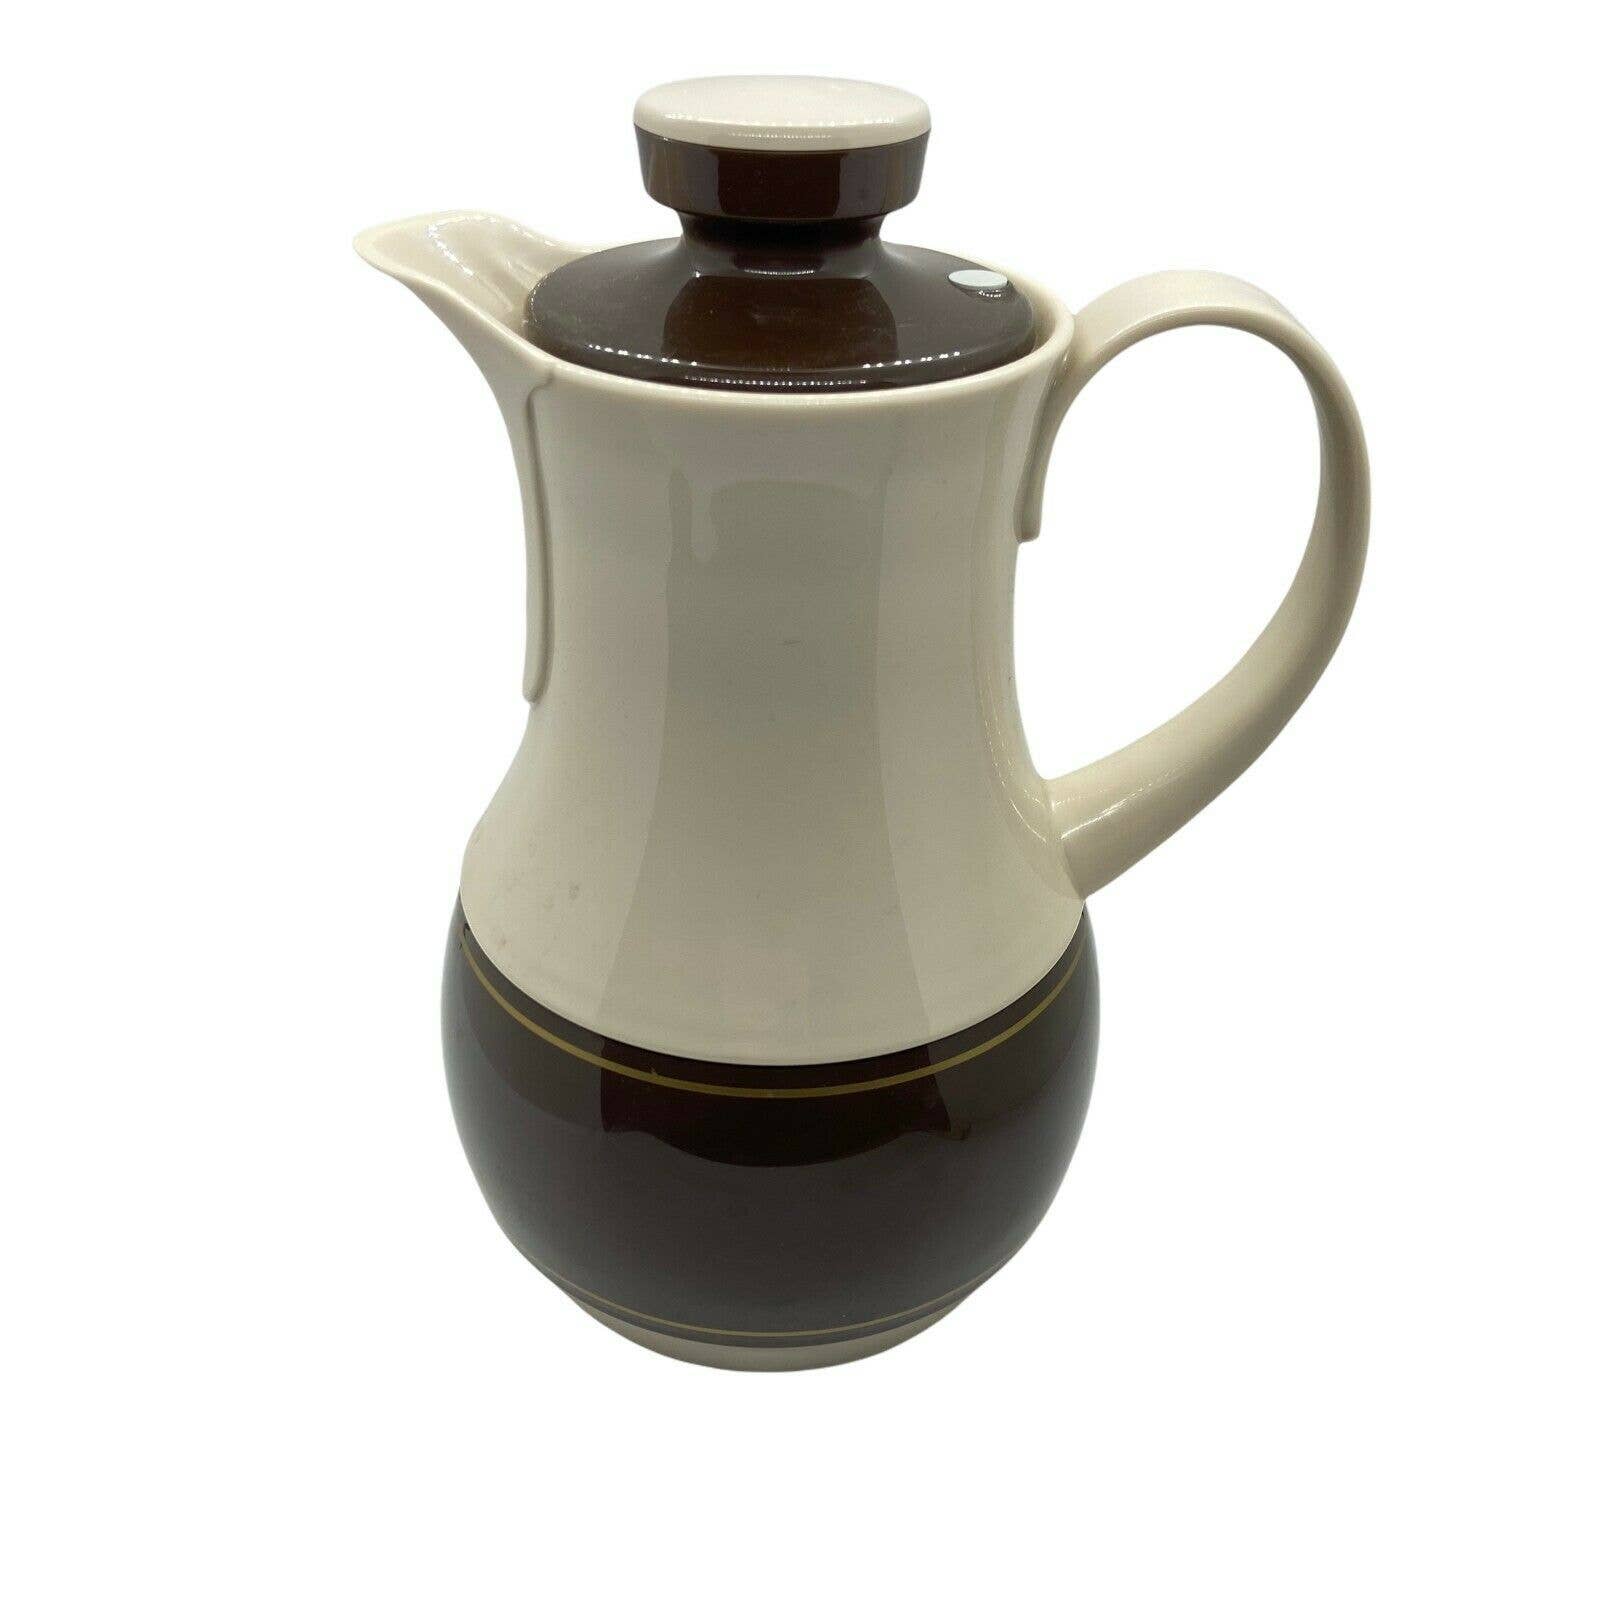 White space-age Thermos carafe / coffee butler / water jug